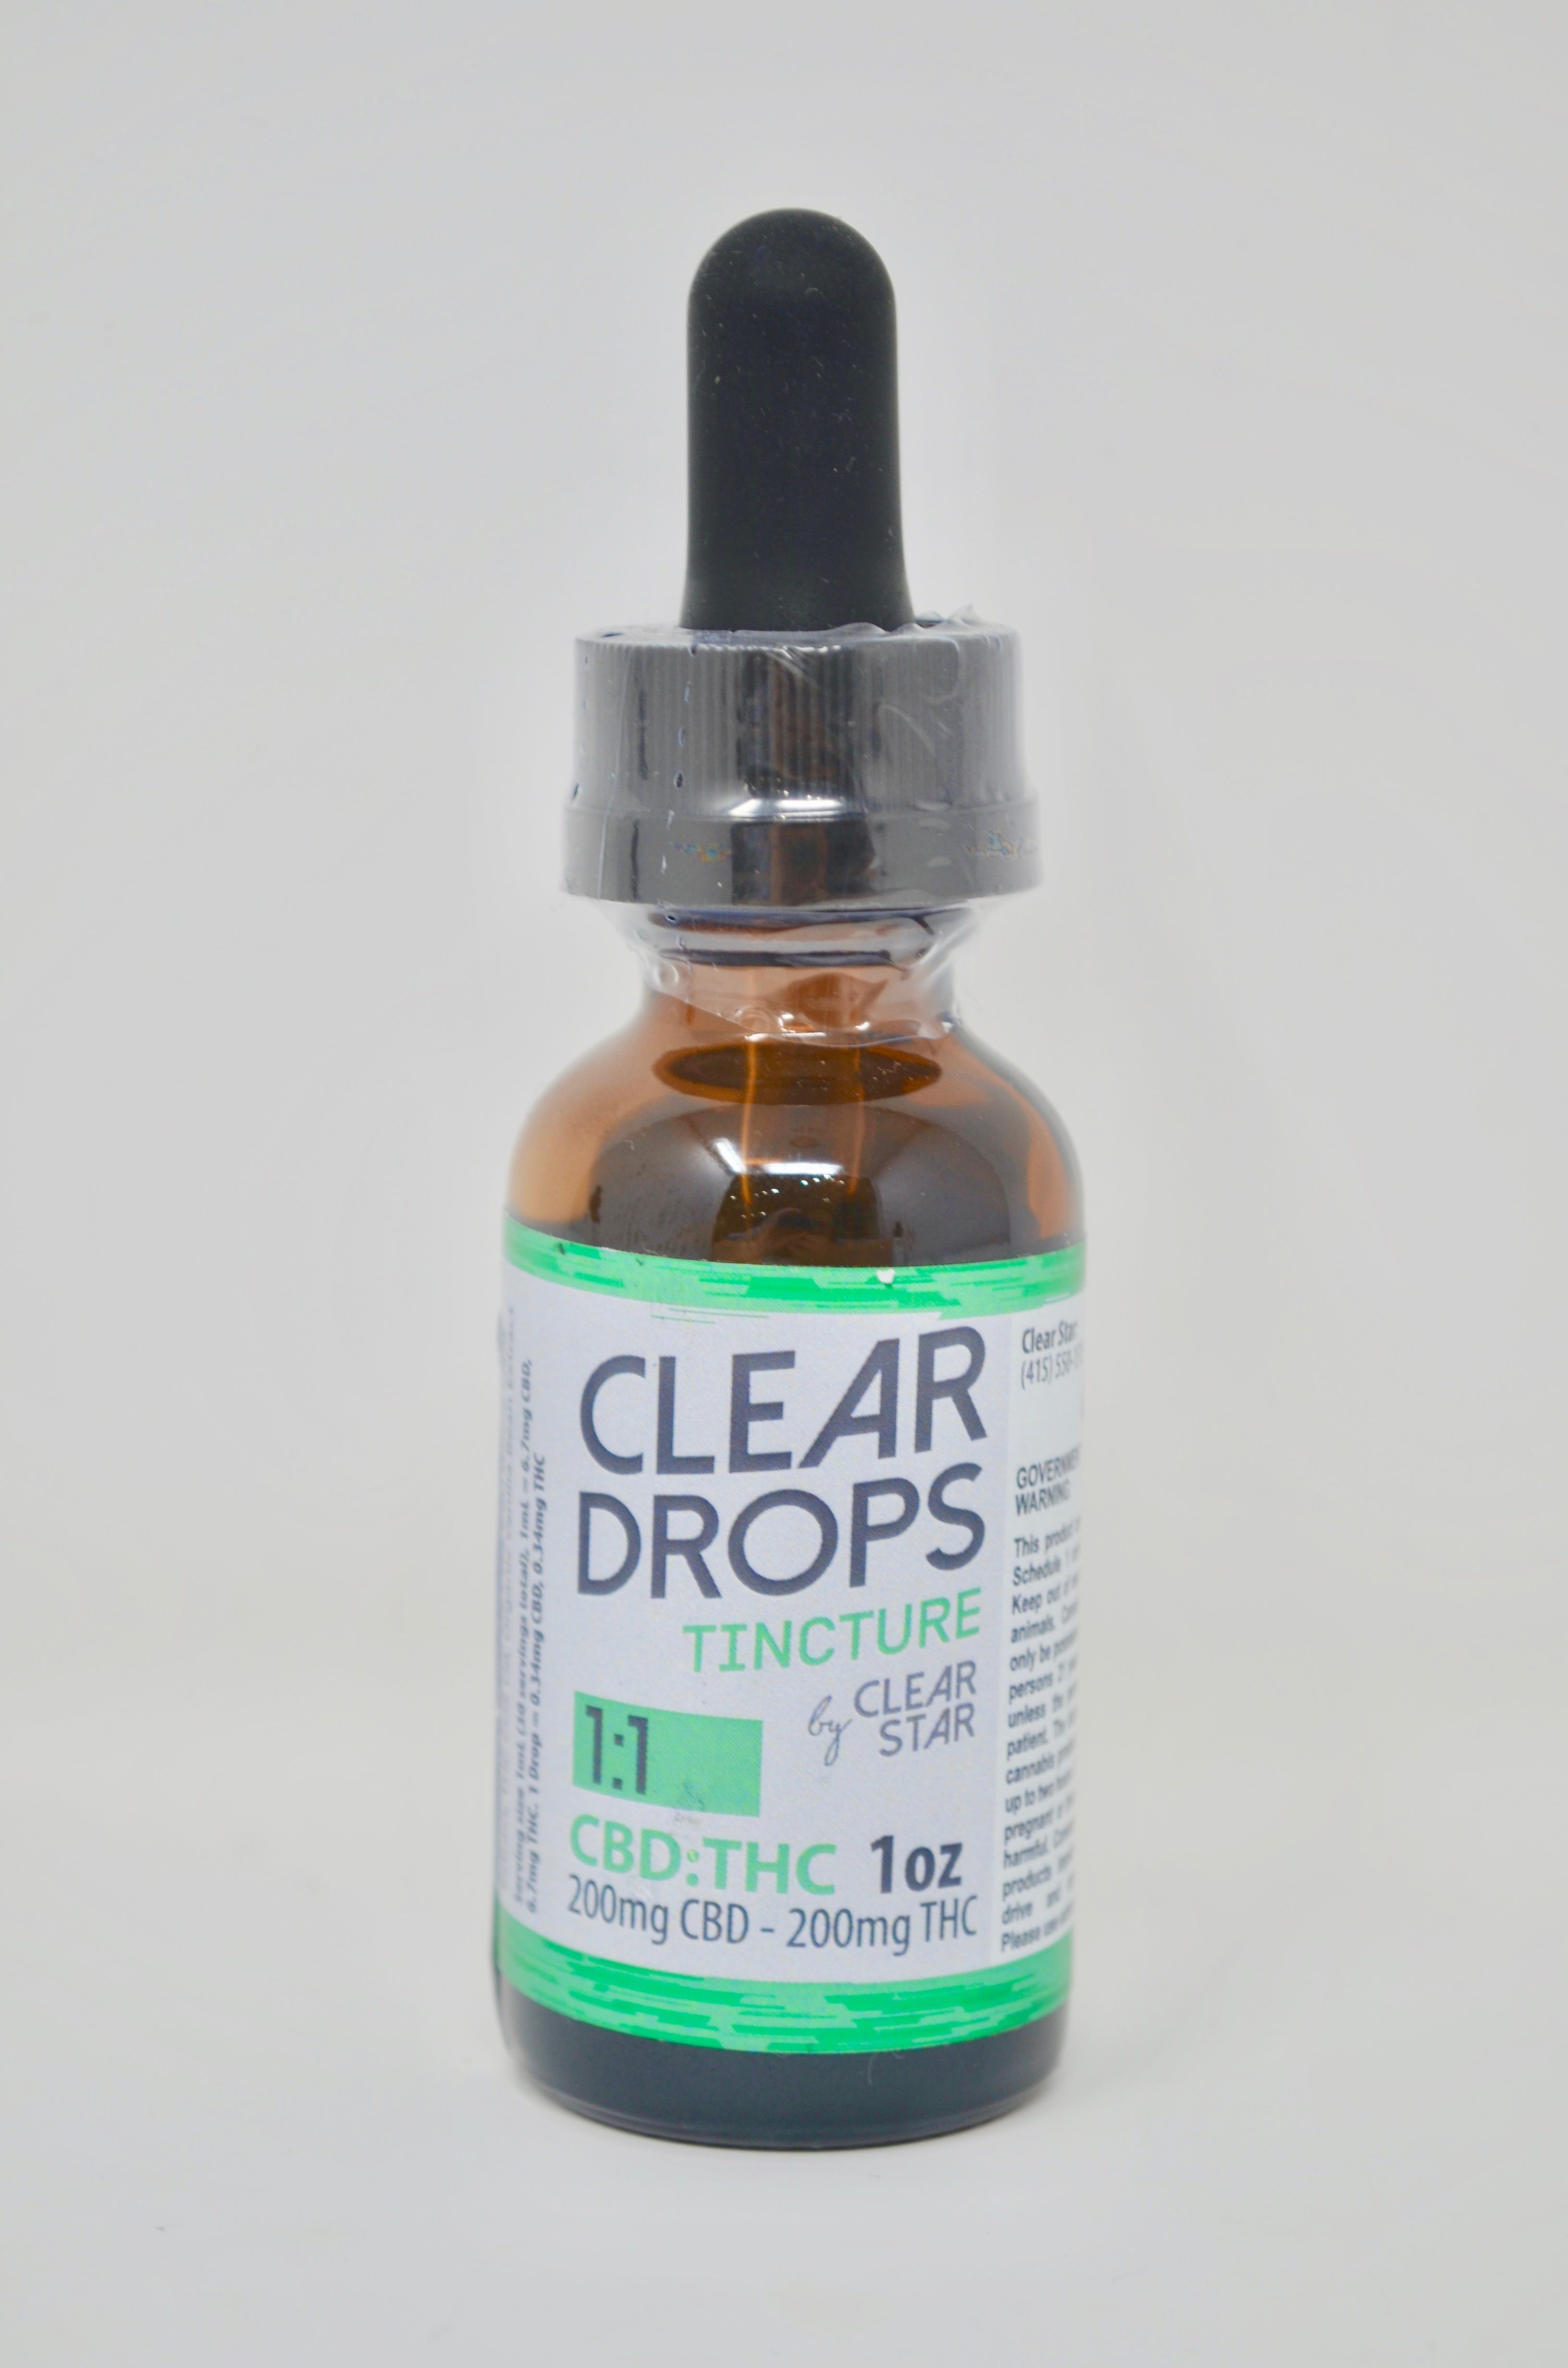 tincture-clear-drops-by-clear-star-11-cbdthc-1-oz